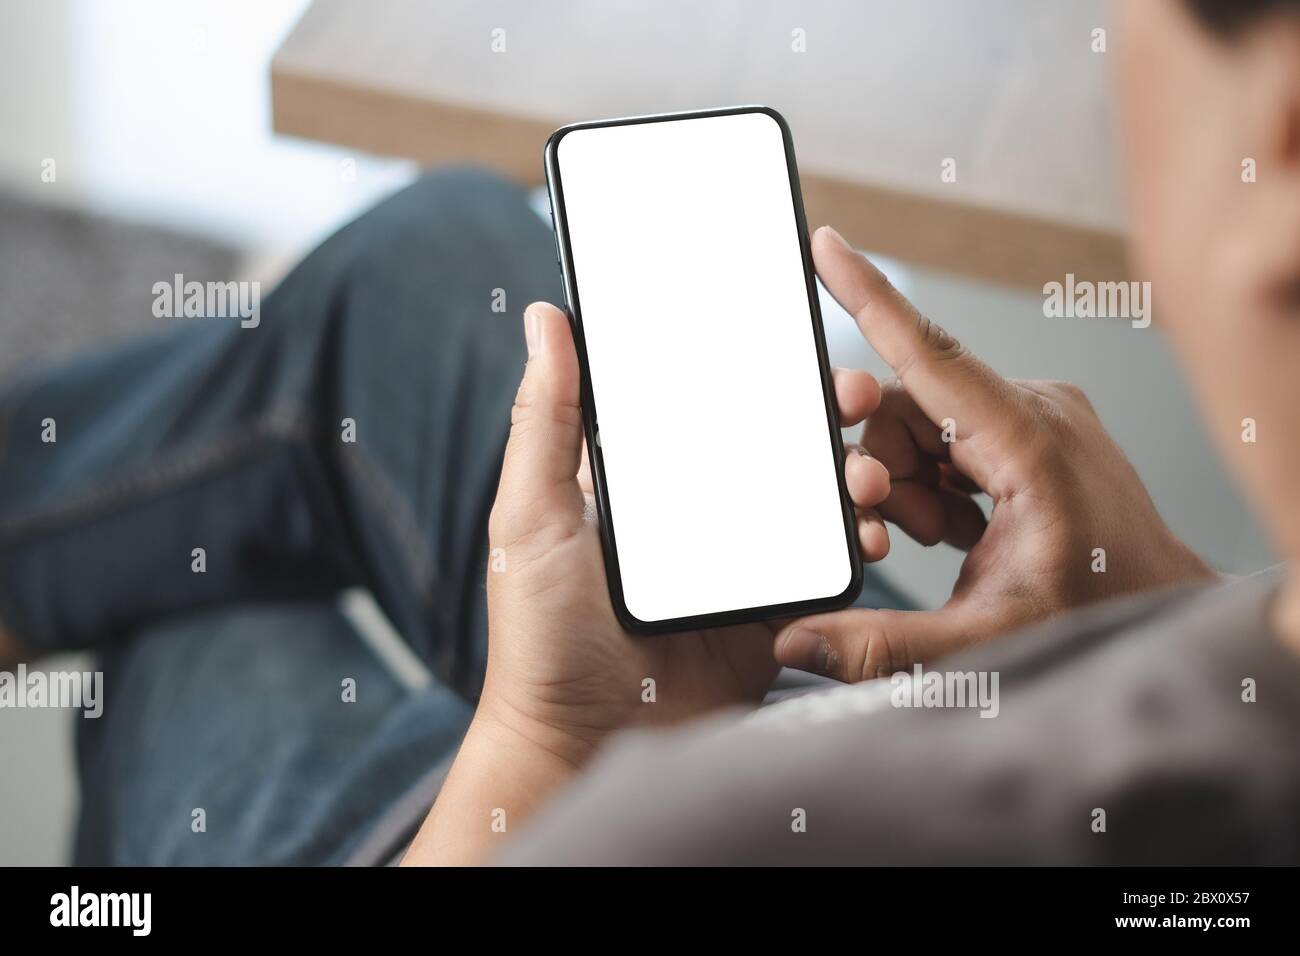 Top view Mockup image hand using a smartphone man Holding Cell Phone With  Blank Screen Stock Photo - Alamy